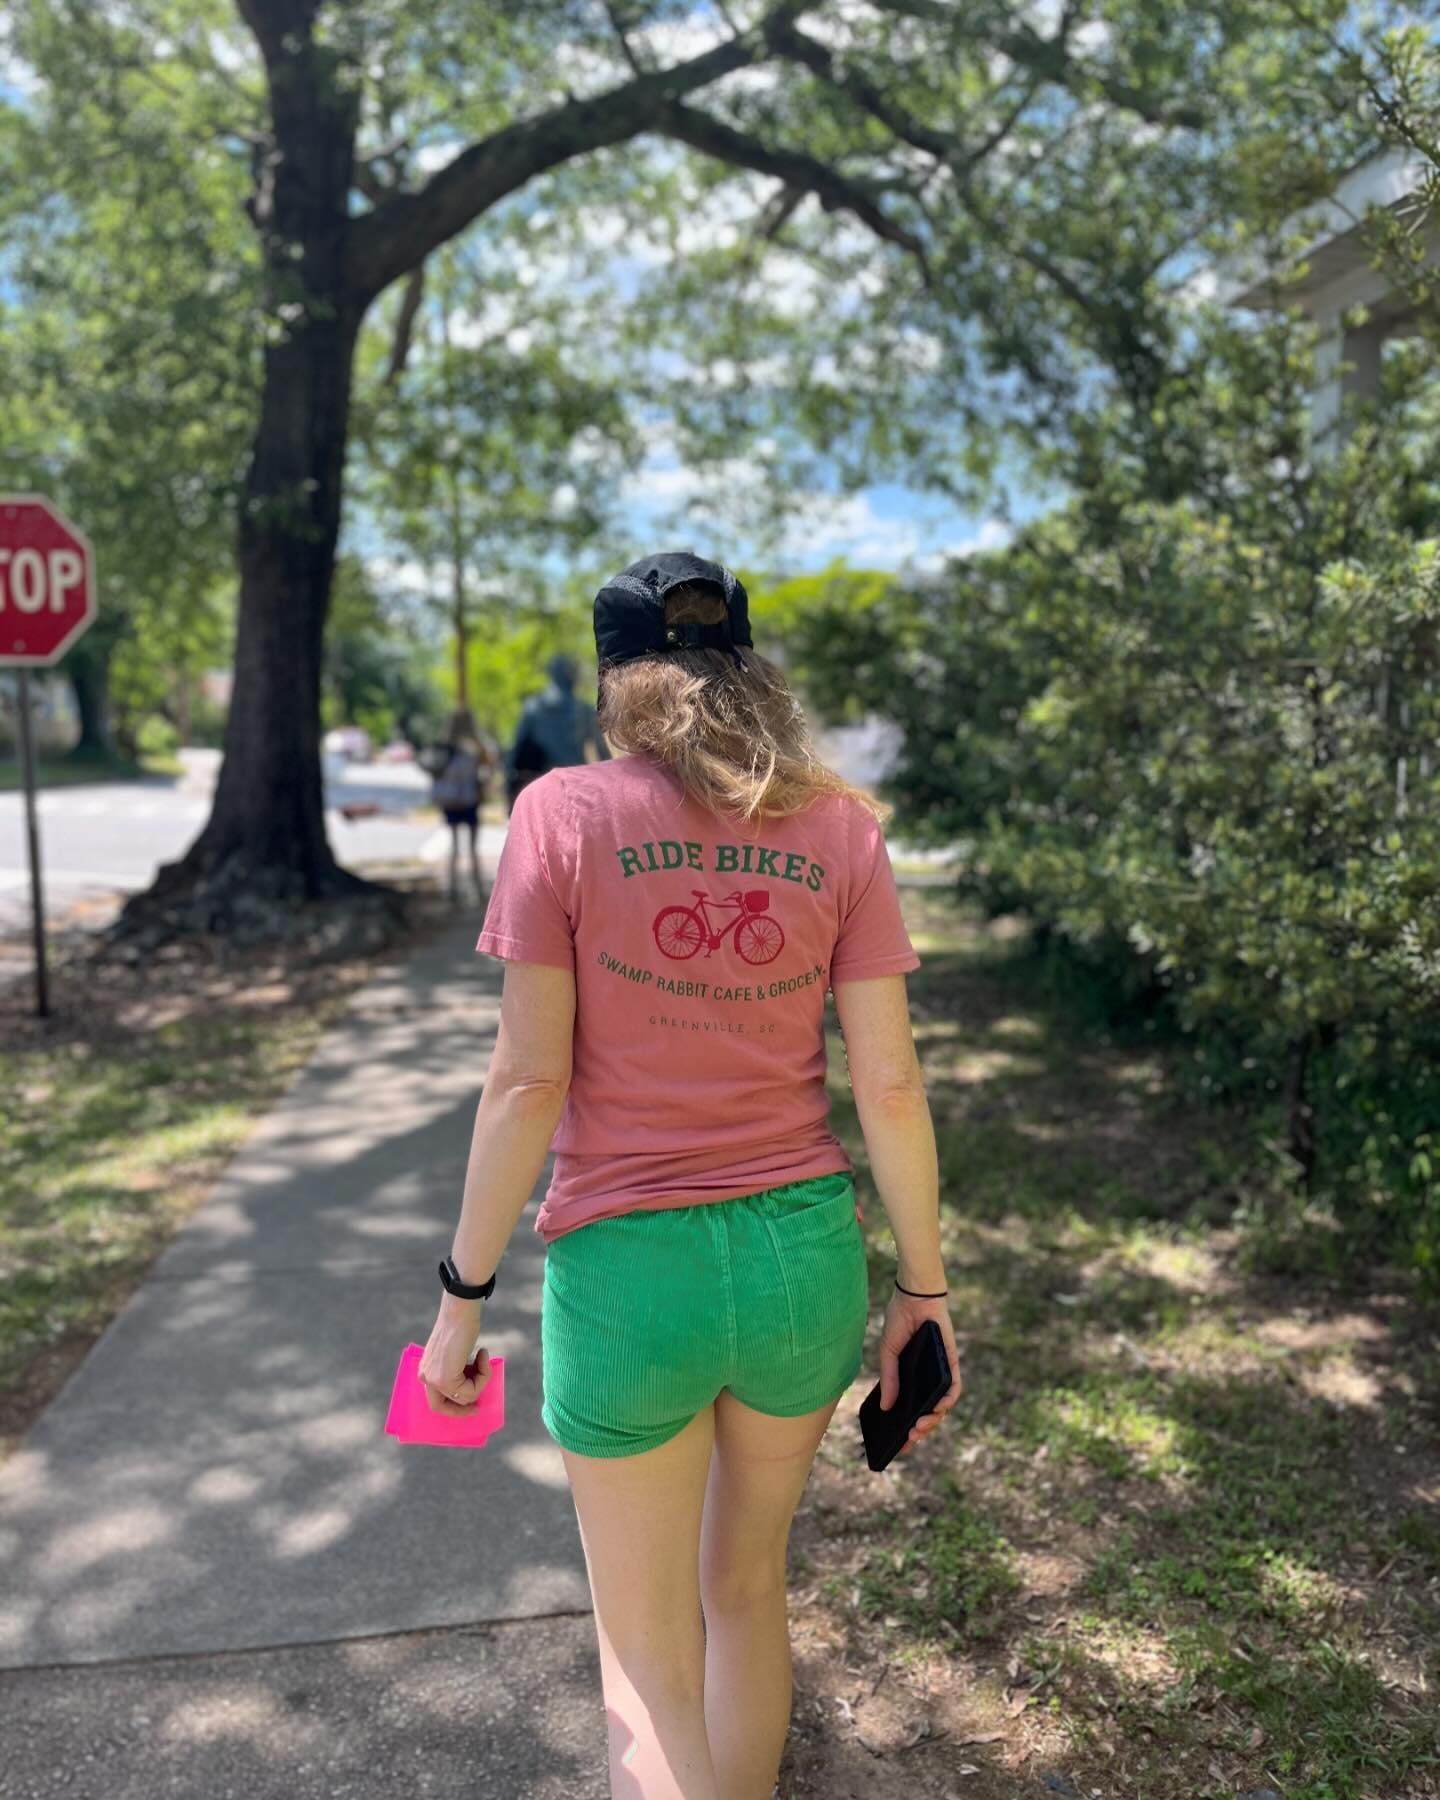 If Mom wants to dress like a strawberry this season, she needs the tools to do so. And they need to be made in the USA like our strawberry shirts!